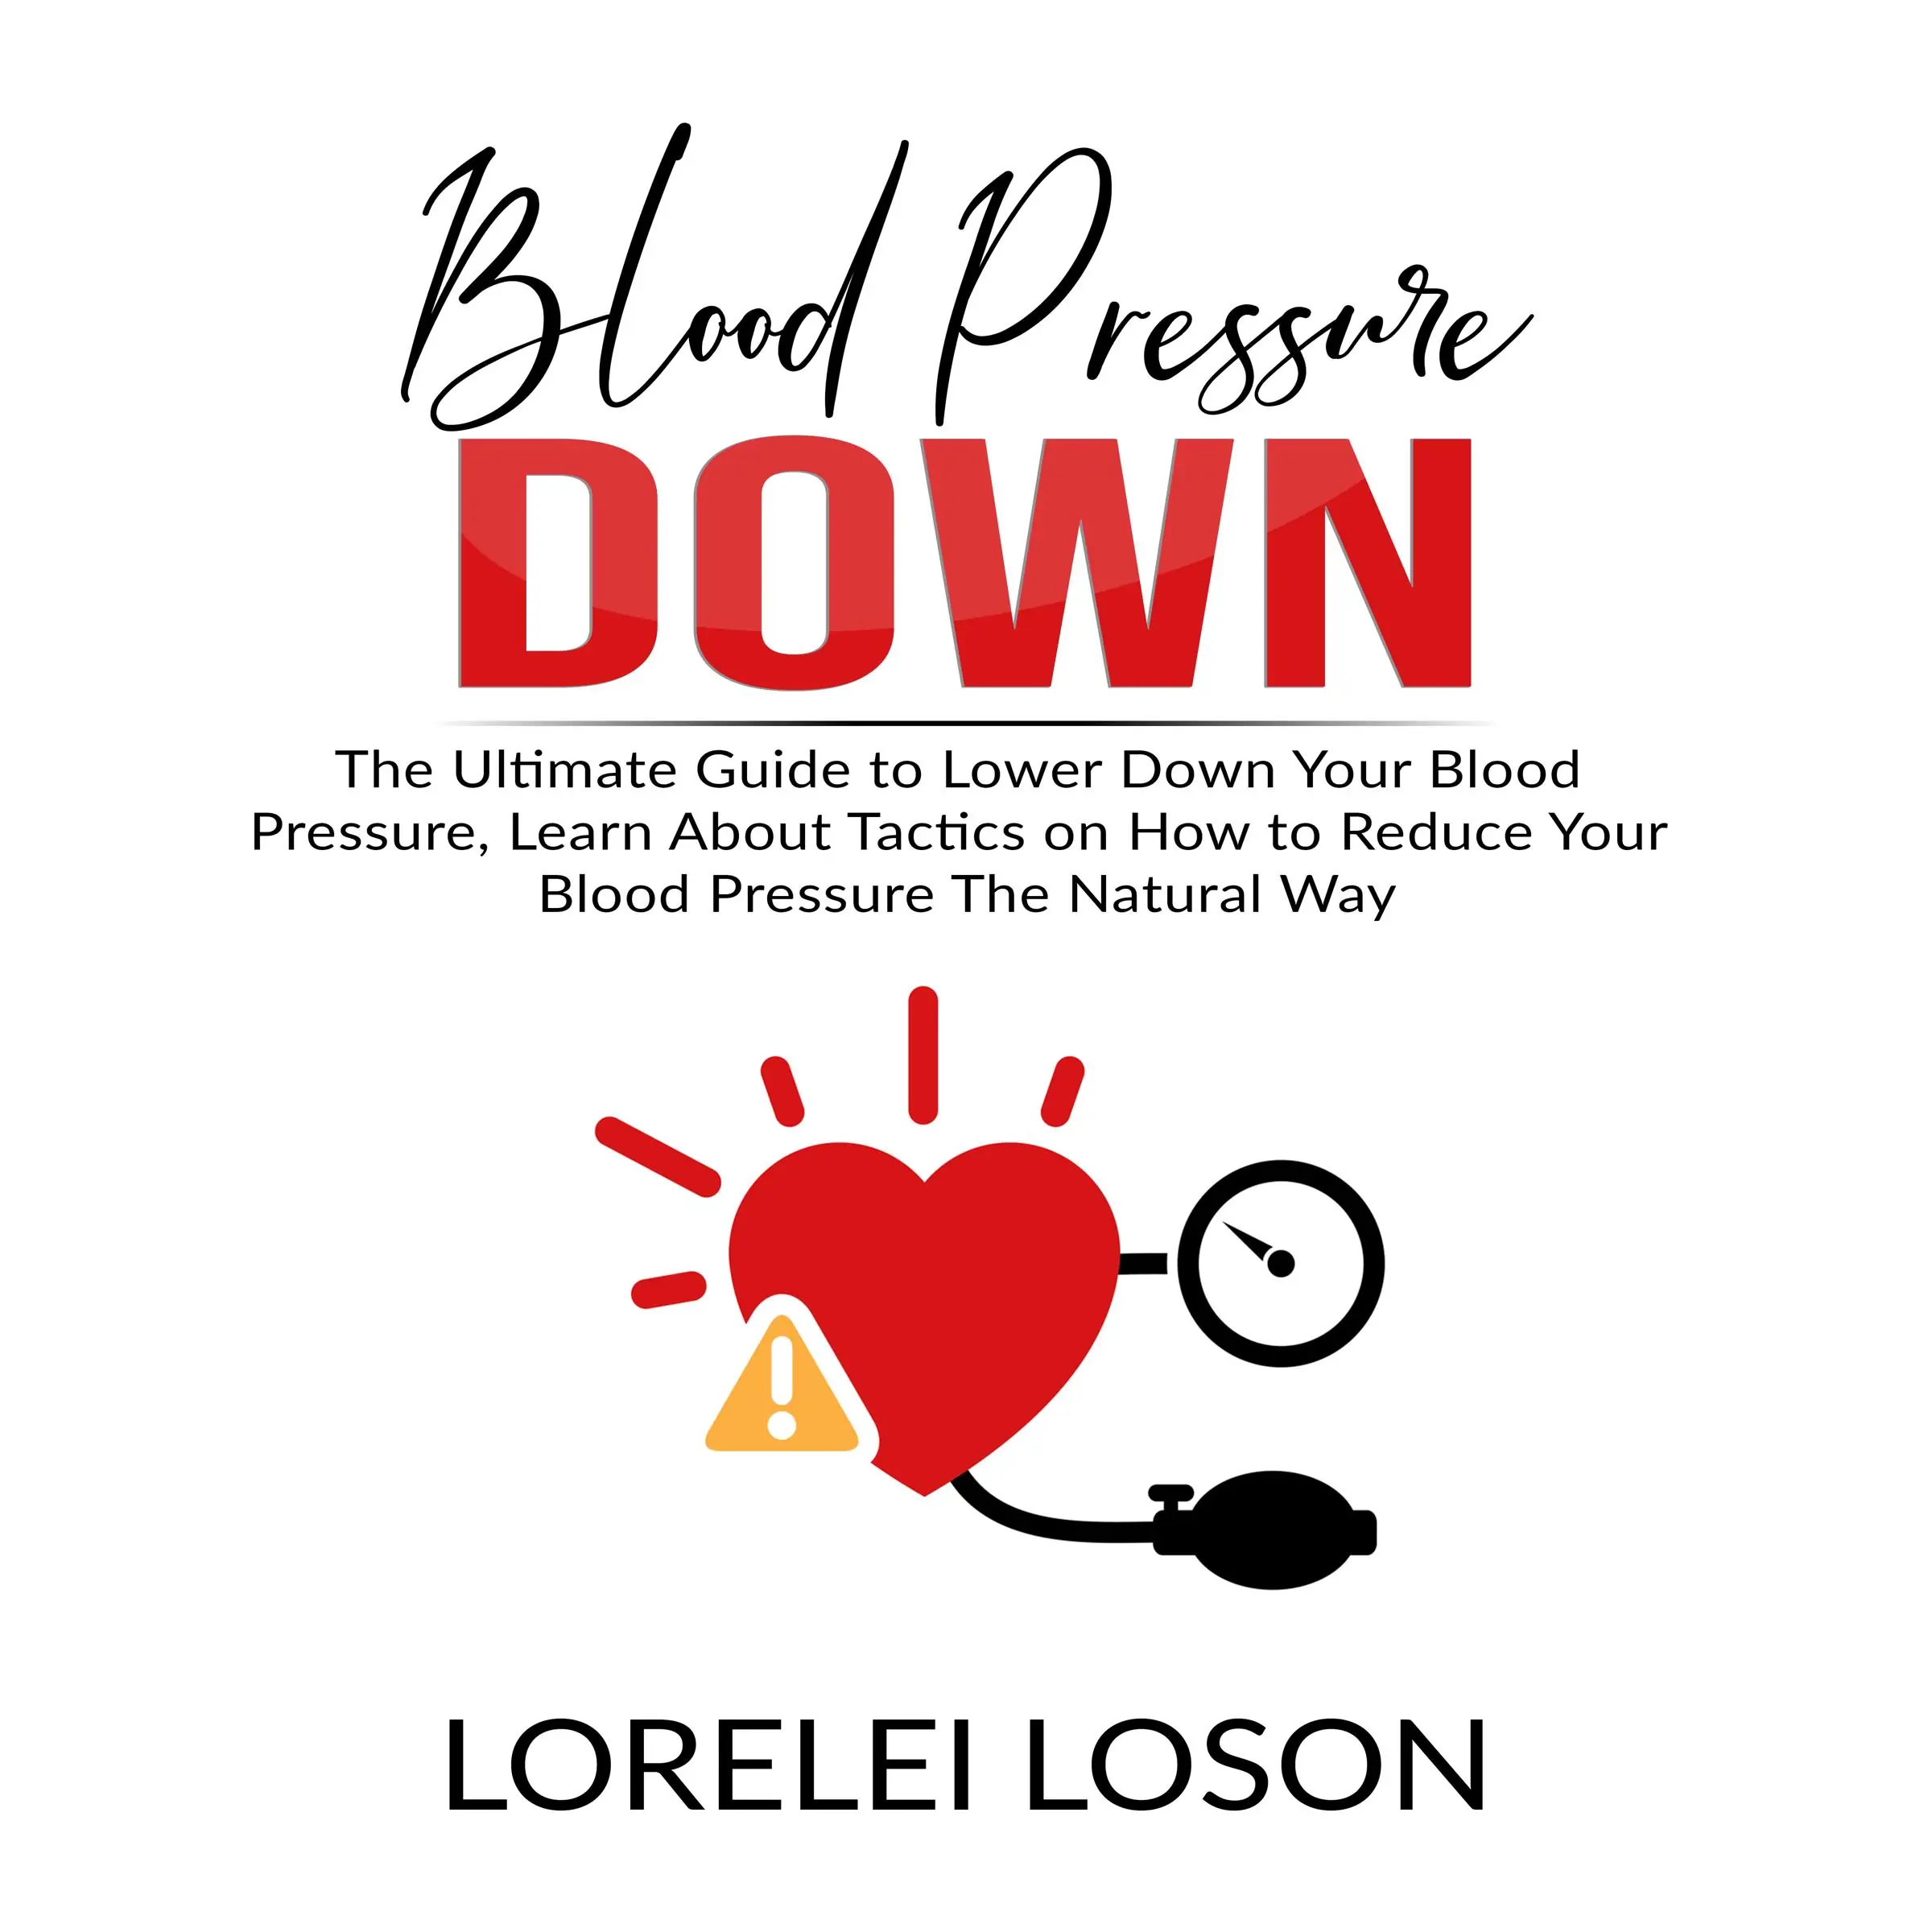 Blood Pressure Down: The Ultimate Guide to Lower Down Your Blood Pressure, Learn About Tactics on How to Reduce Your Blood Pressure The Natural Way Audiobook by Lorelei Loson